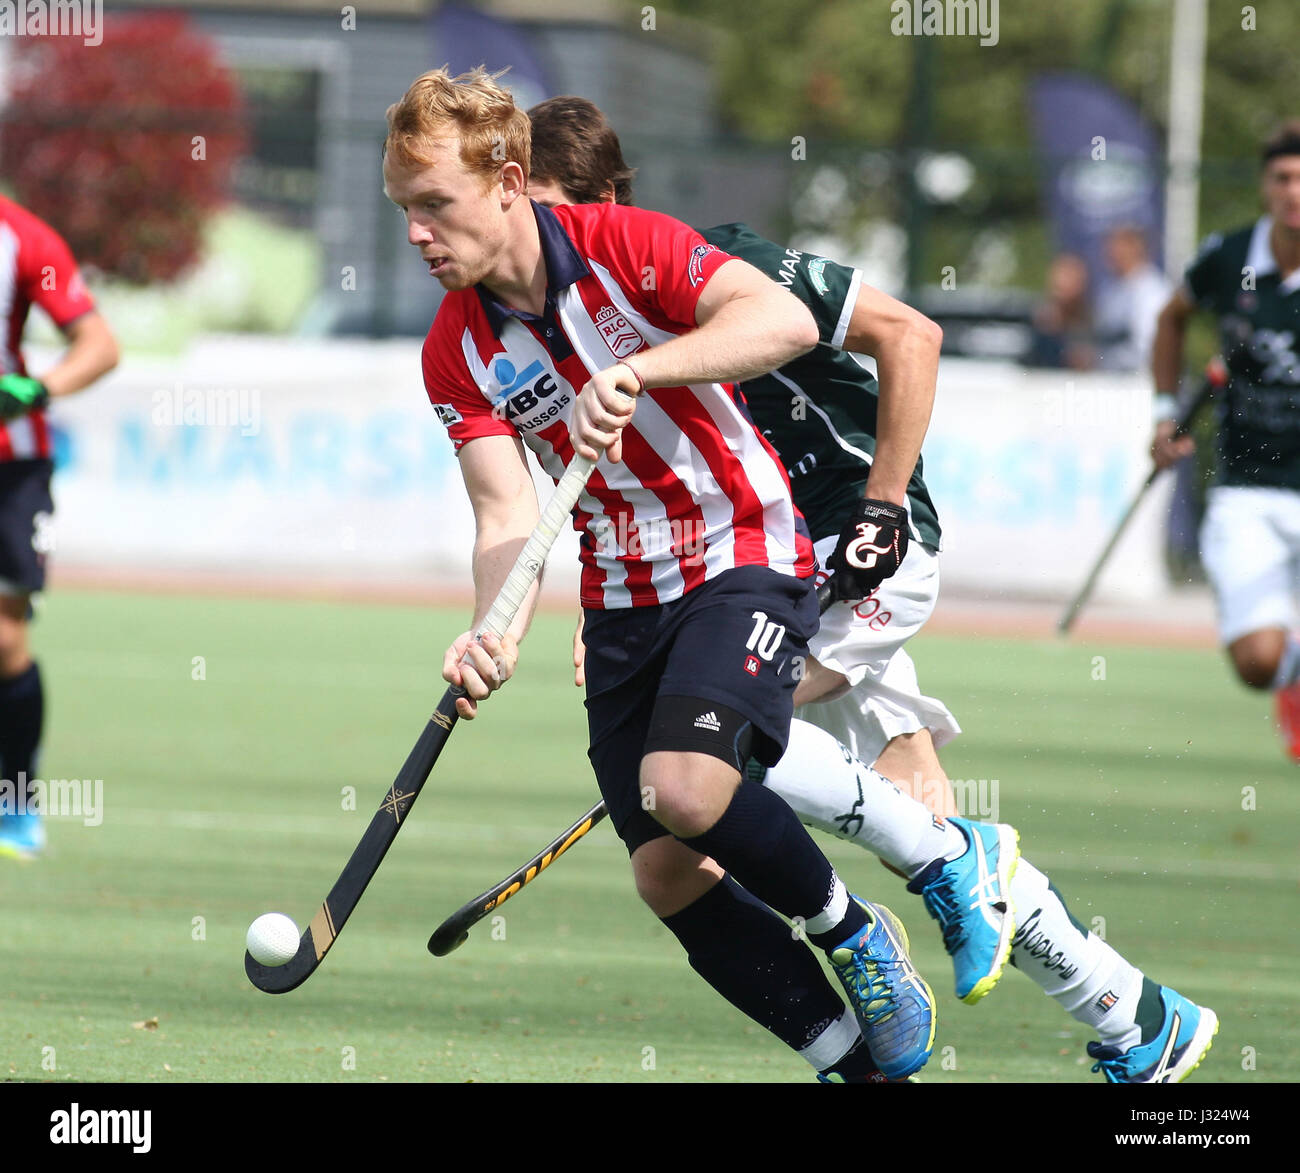 Waterloo, Belgium. 01st May, 2017. Honor Mens National, Dimitri Cuvelier of Leopold in game action, during the match Waterloo Ducks-Leopold. Credit: Leo Cavallo/Alamy Live News Stock Photo